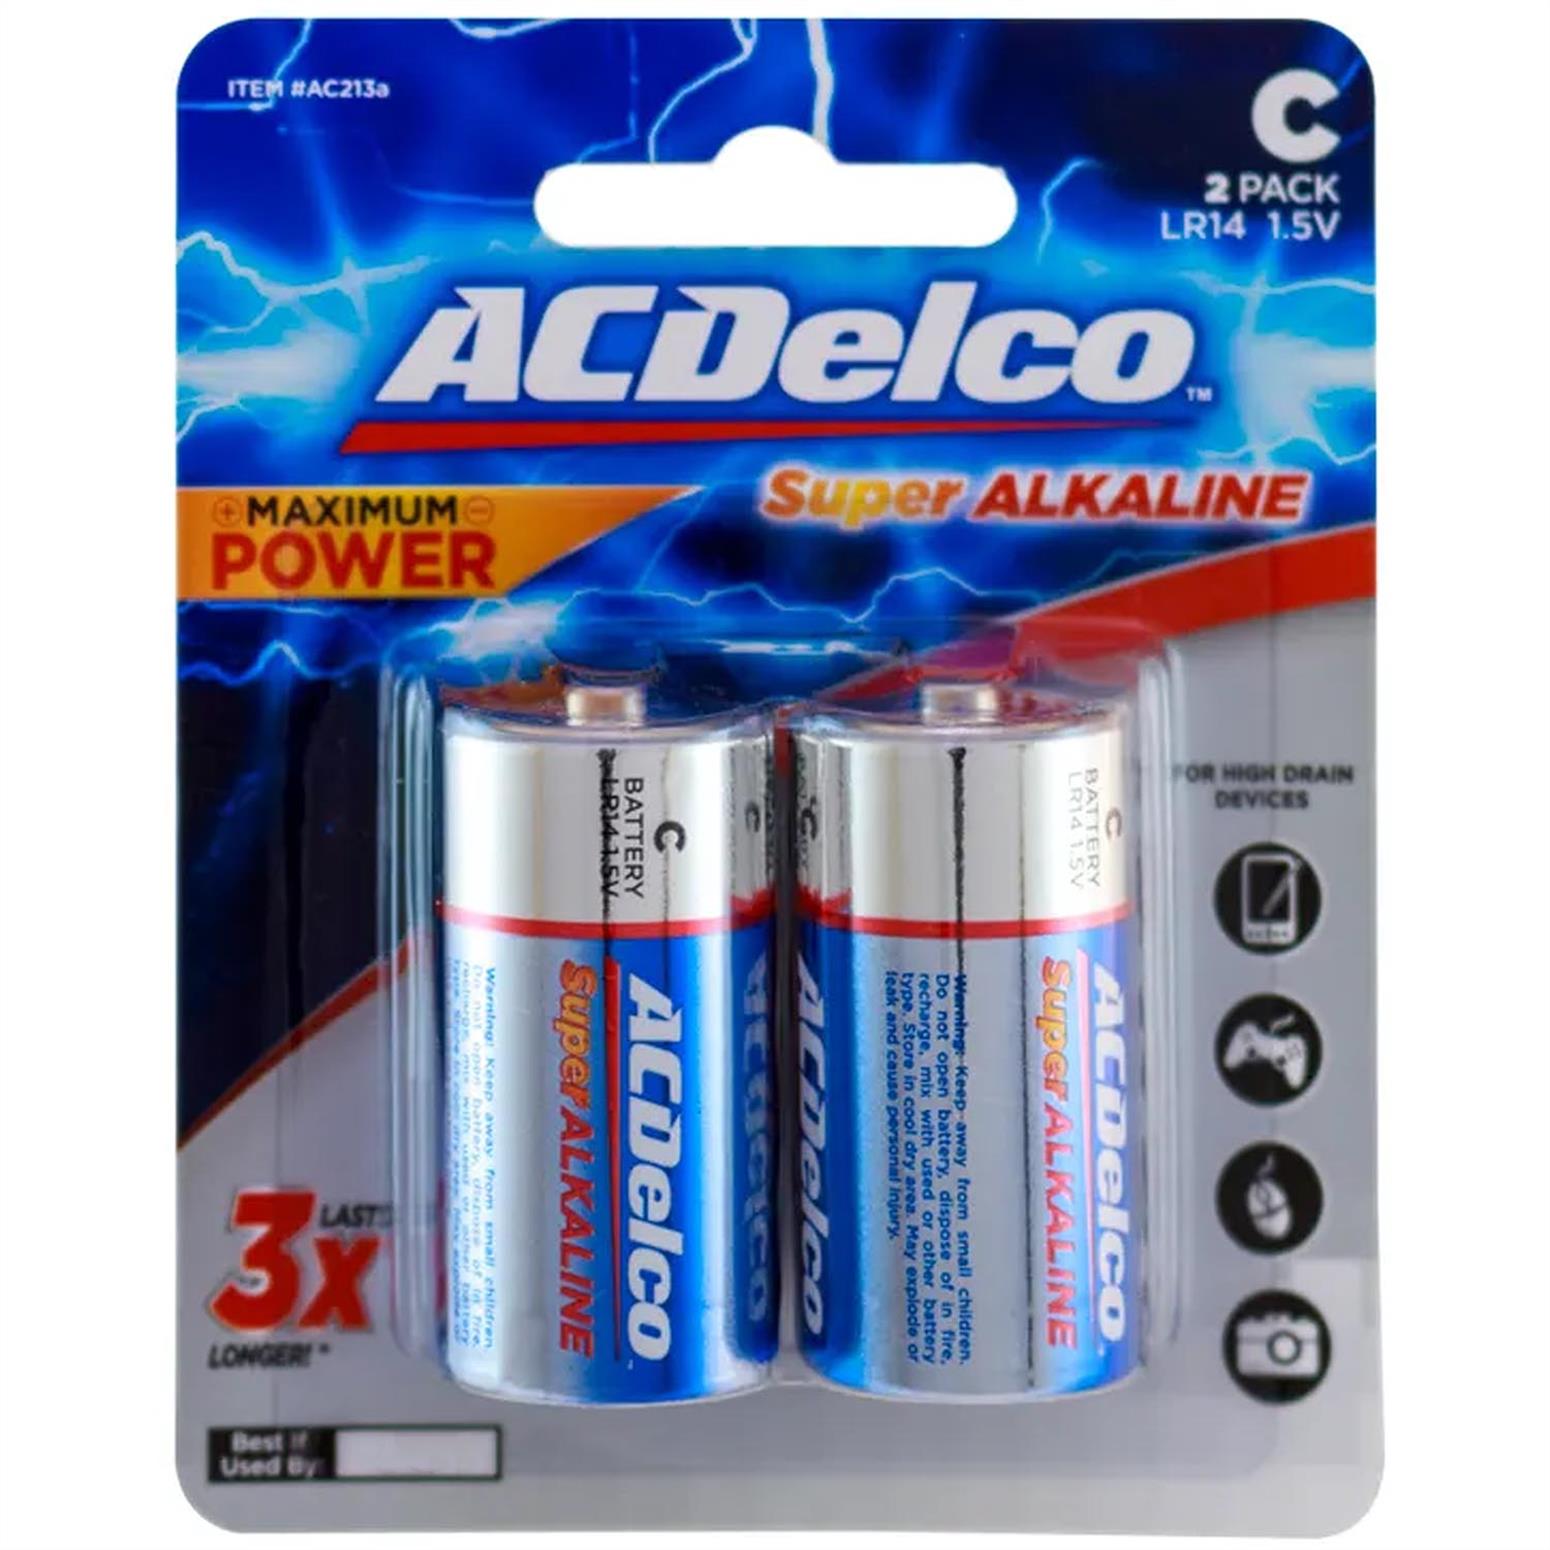 ACDelco Alkaline Battery C 1.5V, Pack of 2 Pieces